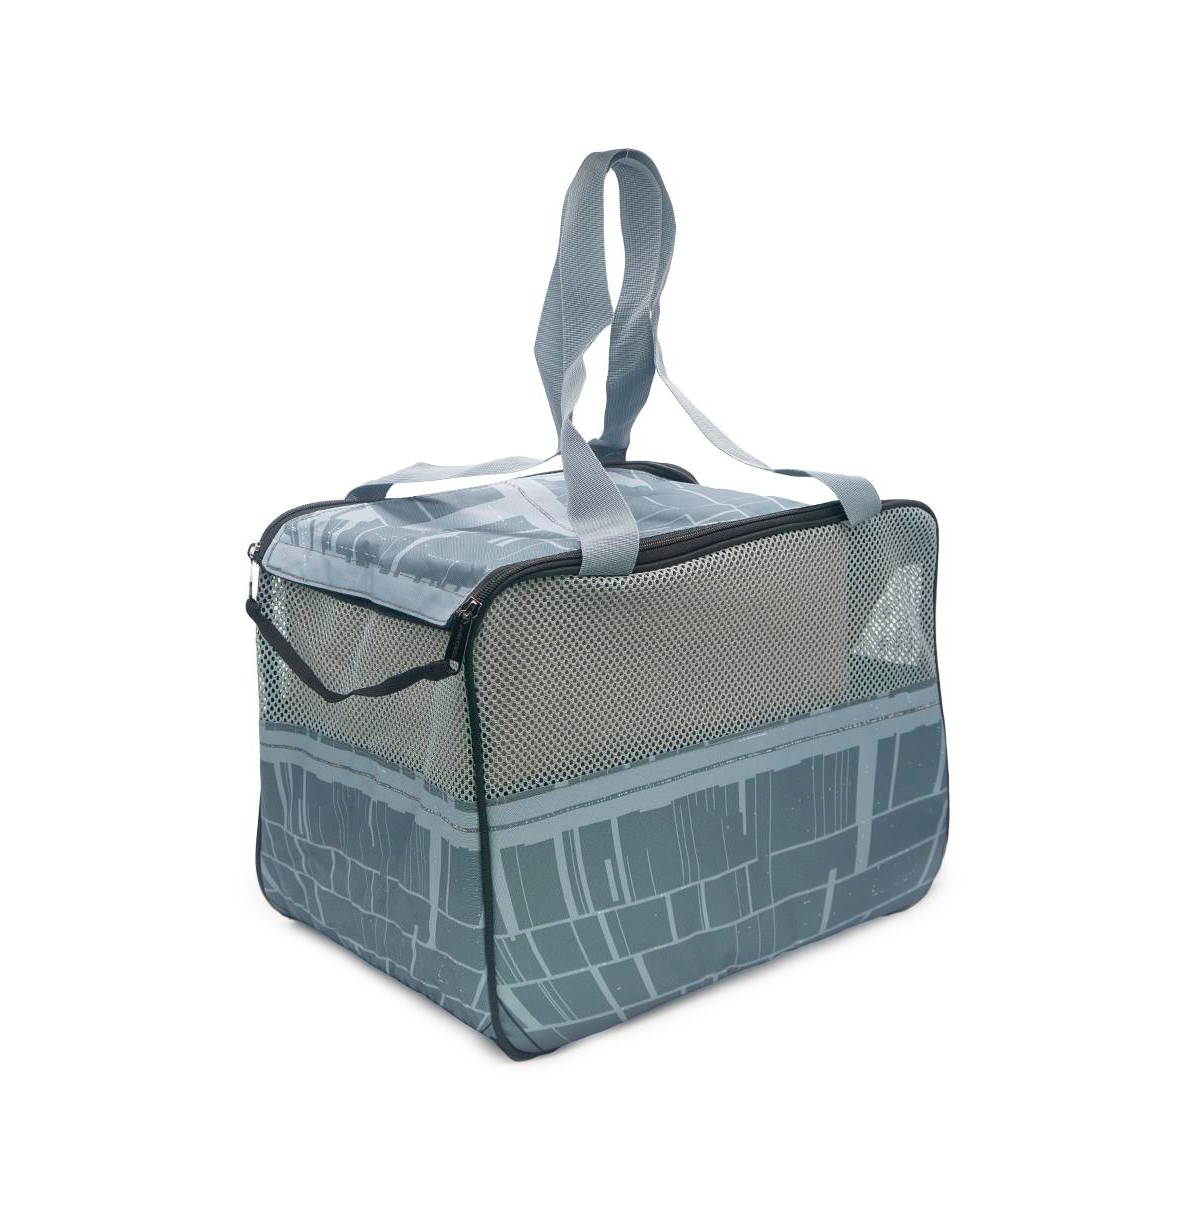 Star Wars Pet Carrier, Death Star, Dog Cat Bunny Carrying Case - Grey